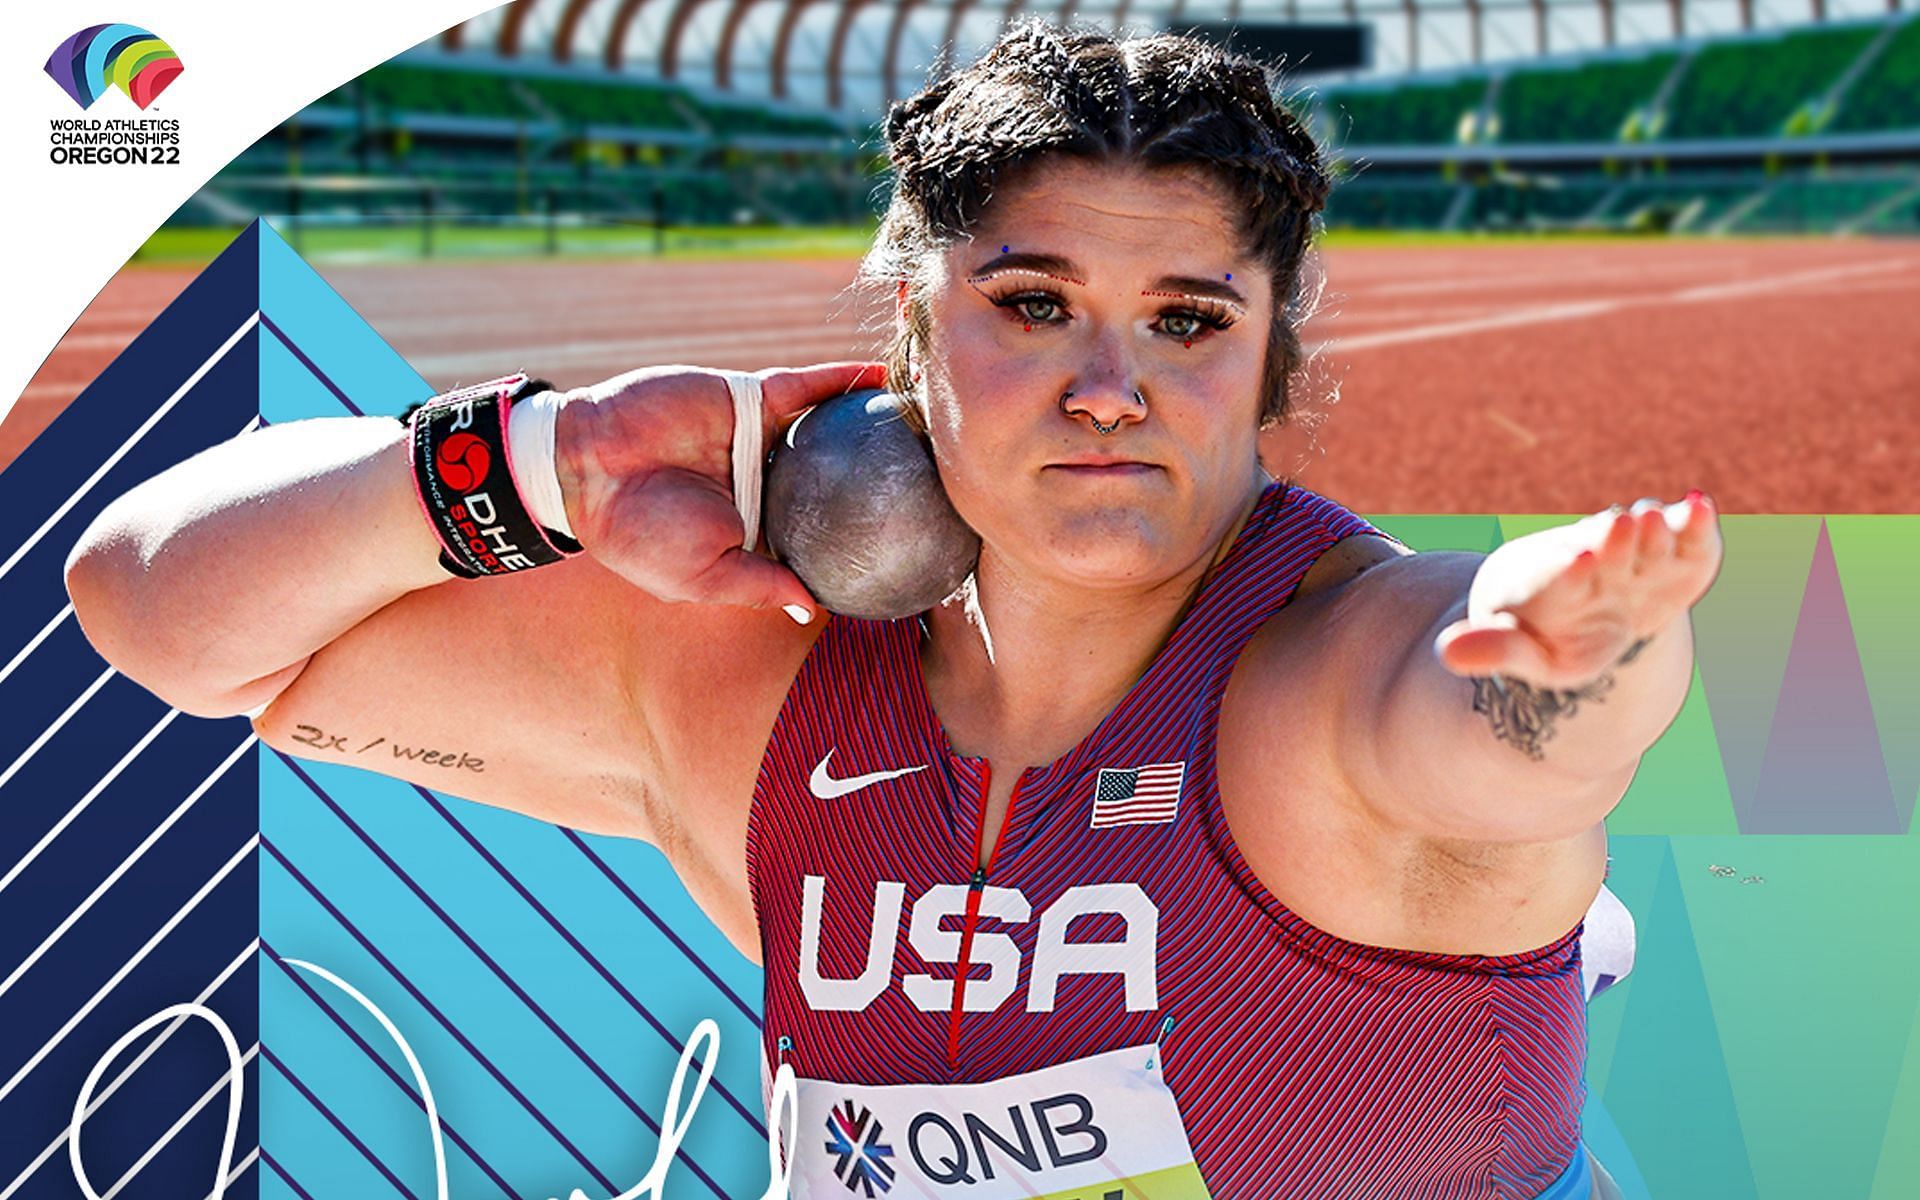 Chase Ealey became the first American woman to win a world title in Shot put (Image via World Athletics)